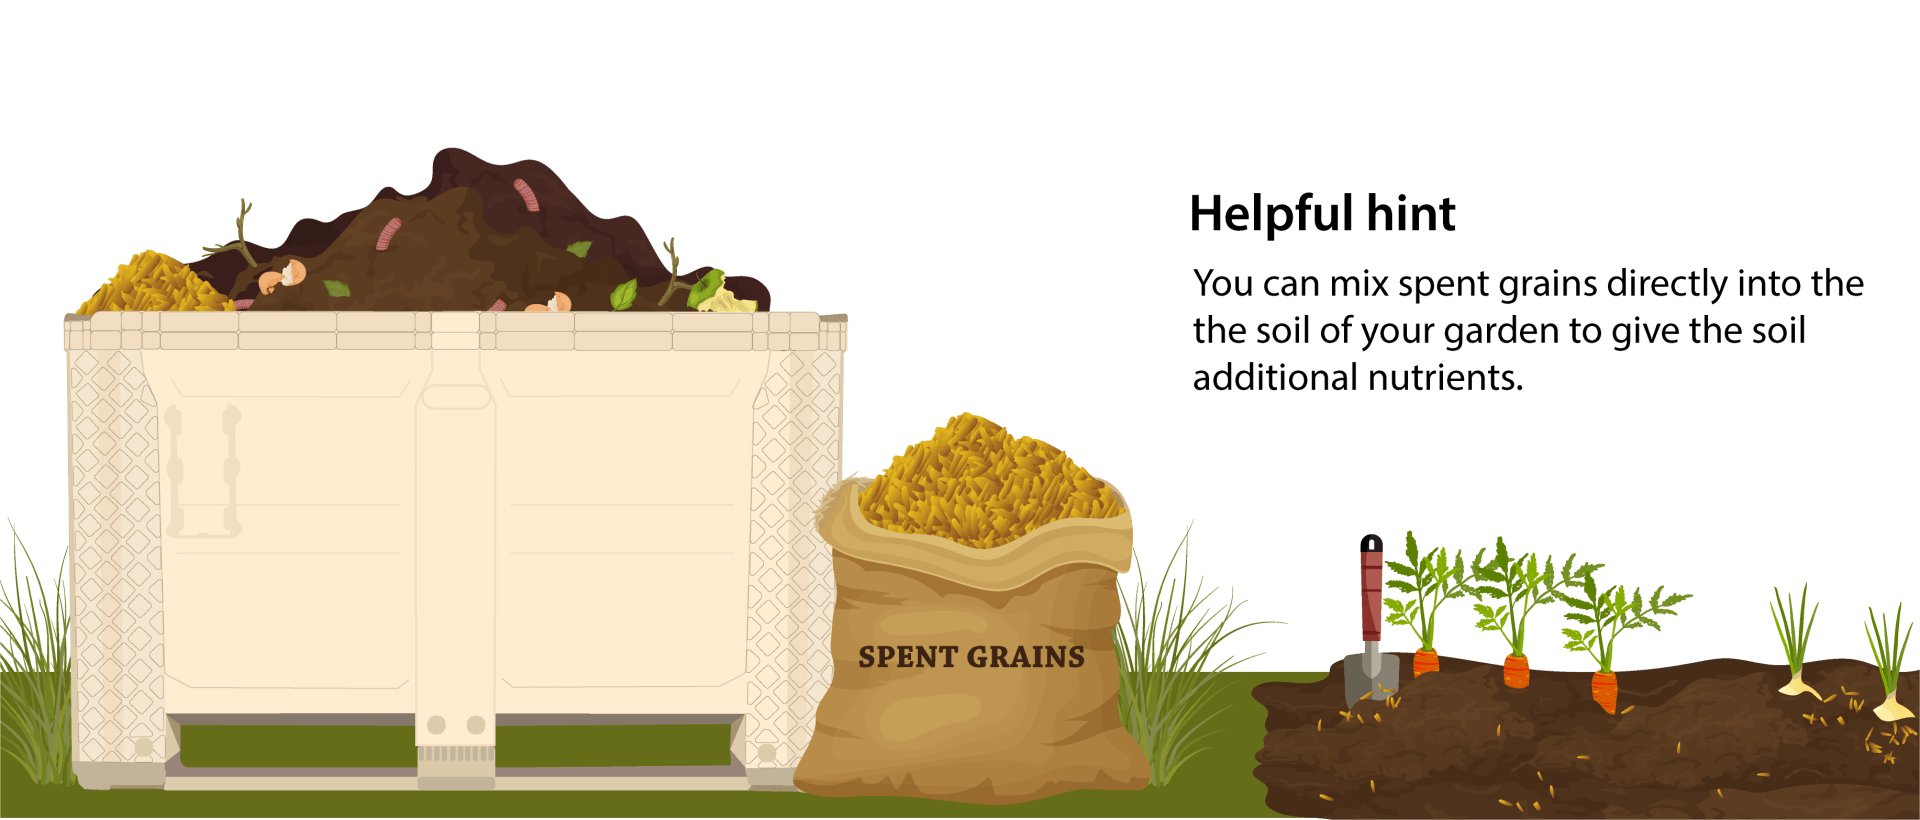 Use spent grains for compost